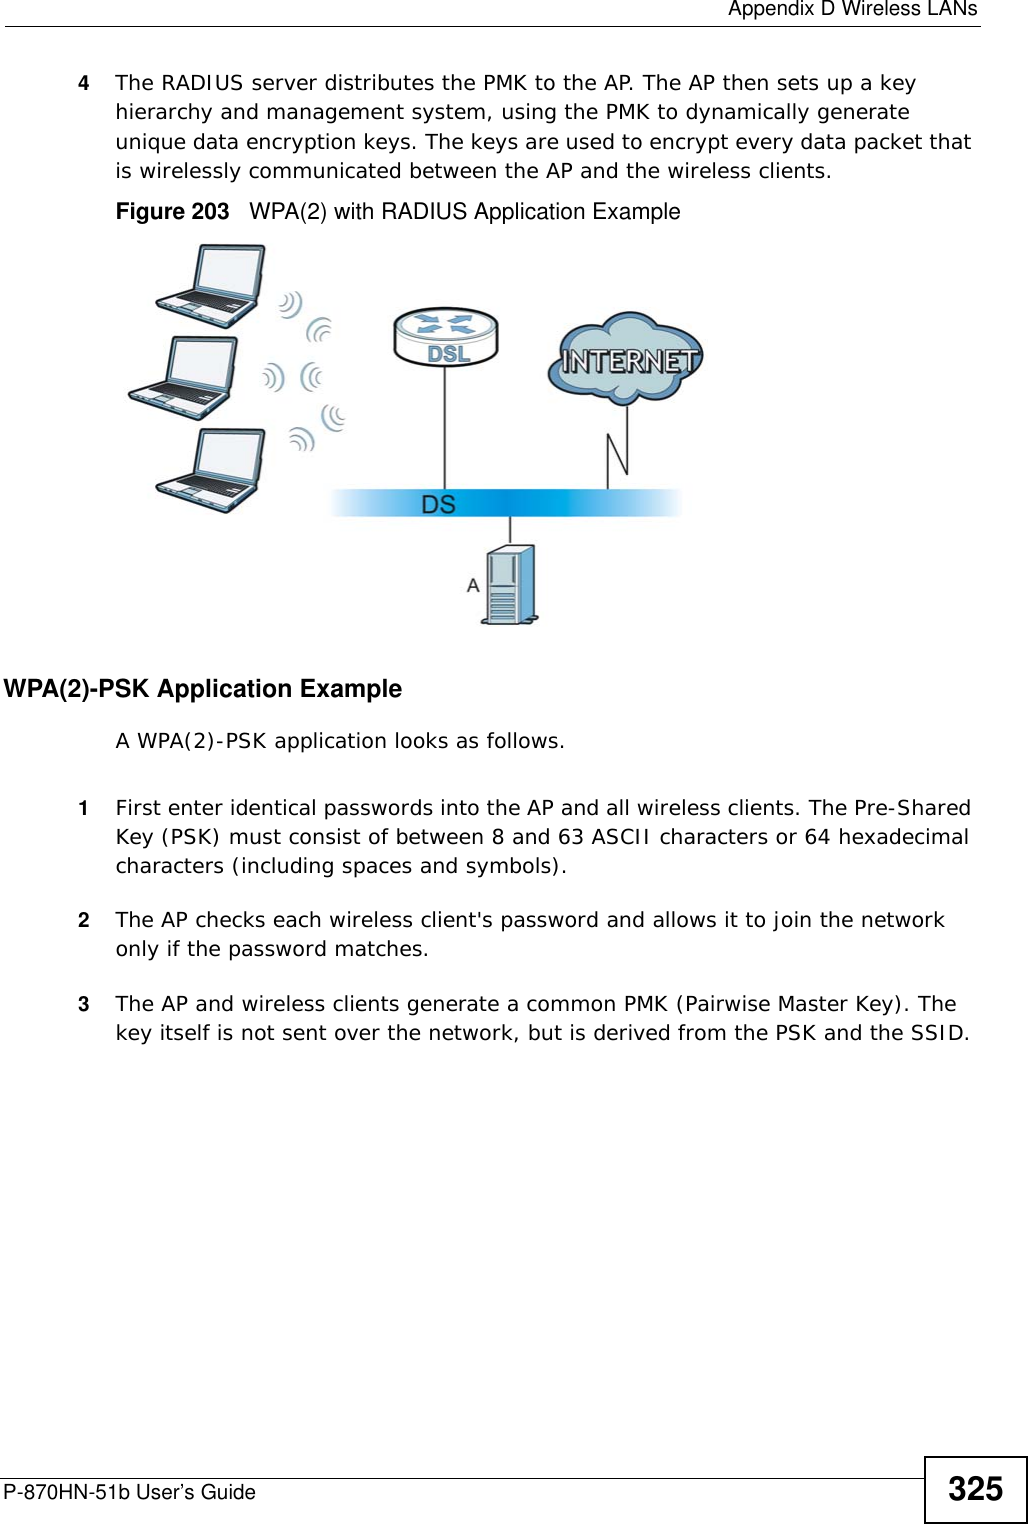  Appendix D Wireless LANsP-870HN-51b User’s Guide 3254The RADIUS server distributes the PMK to the AP. The AP then sets up a key hierarchy and management system, using the PMK to dynamically generate unique data encryption keys. The keys are used to encrypt every data packet that is wirelessly communicated between the AP and the wireless clients.Figure 203   WPA(2) with RADIUS Application ExampleWPA(2)-PSK Application ExampleA WPA(2)-PSK application looks as follows.1First enter identical passwords into the AP and all wireless clients. The Pre-Shared Key (PSK) must consist of between 8 and 63 ASCII characters or 64 hexadecimal characters (including spaces and symbols).2The AP checks each wireless client&apos;s password and allows it to join the network only if the password matches.3The AP and wireless clients generate a common PMK (Pairwise Master Key). The key itself is not sent over the network, but is derived from the PSK and the SSID. 